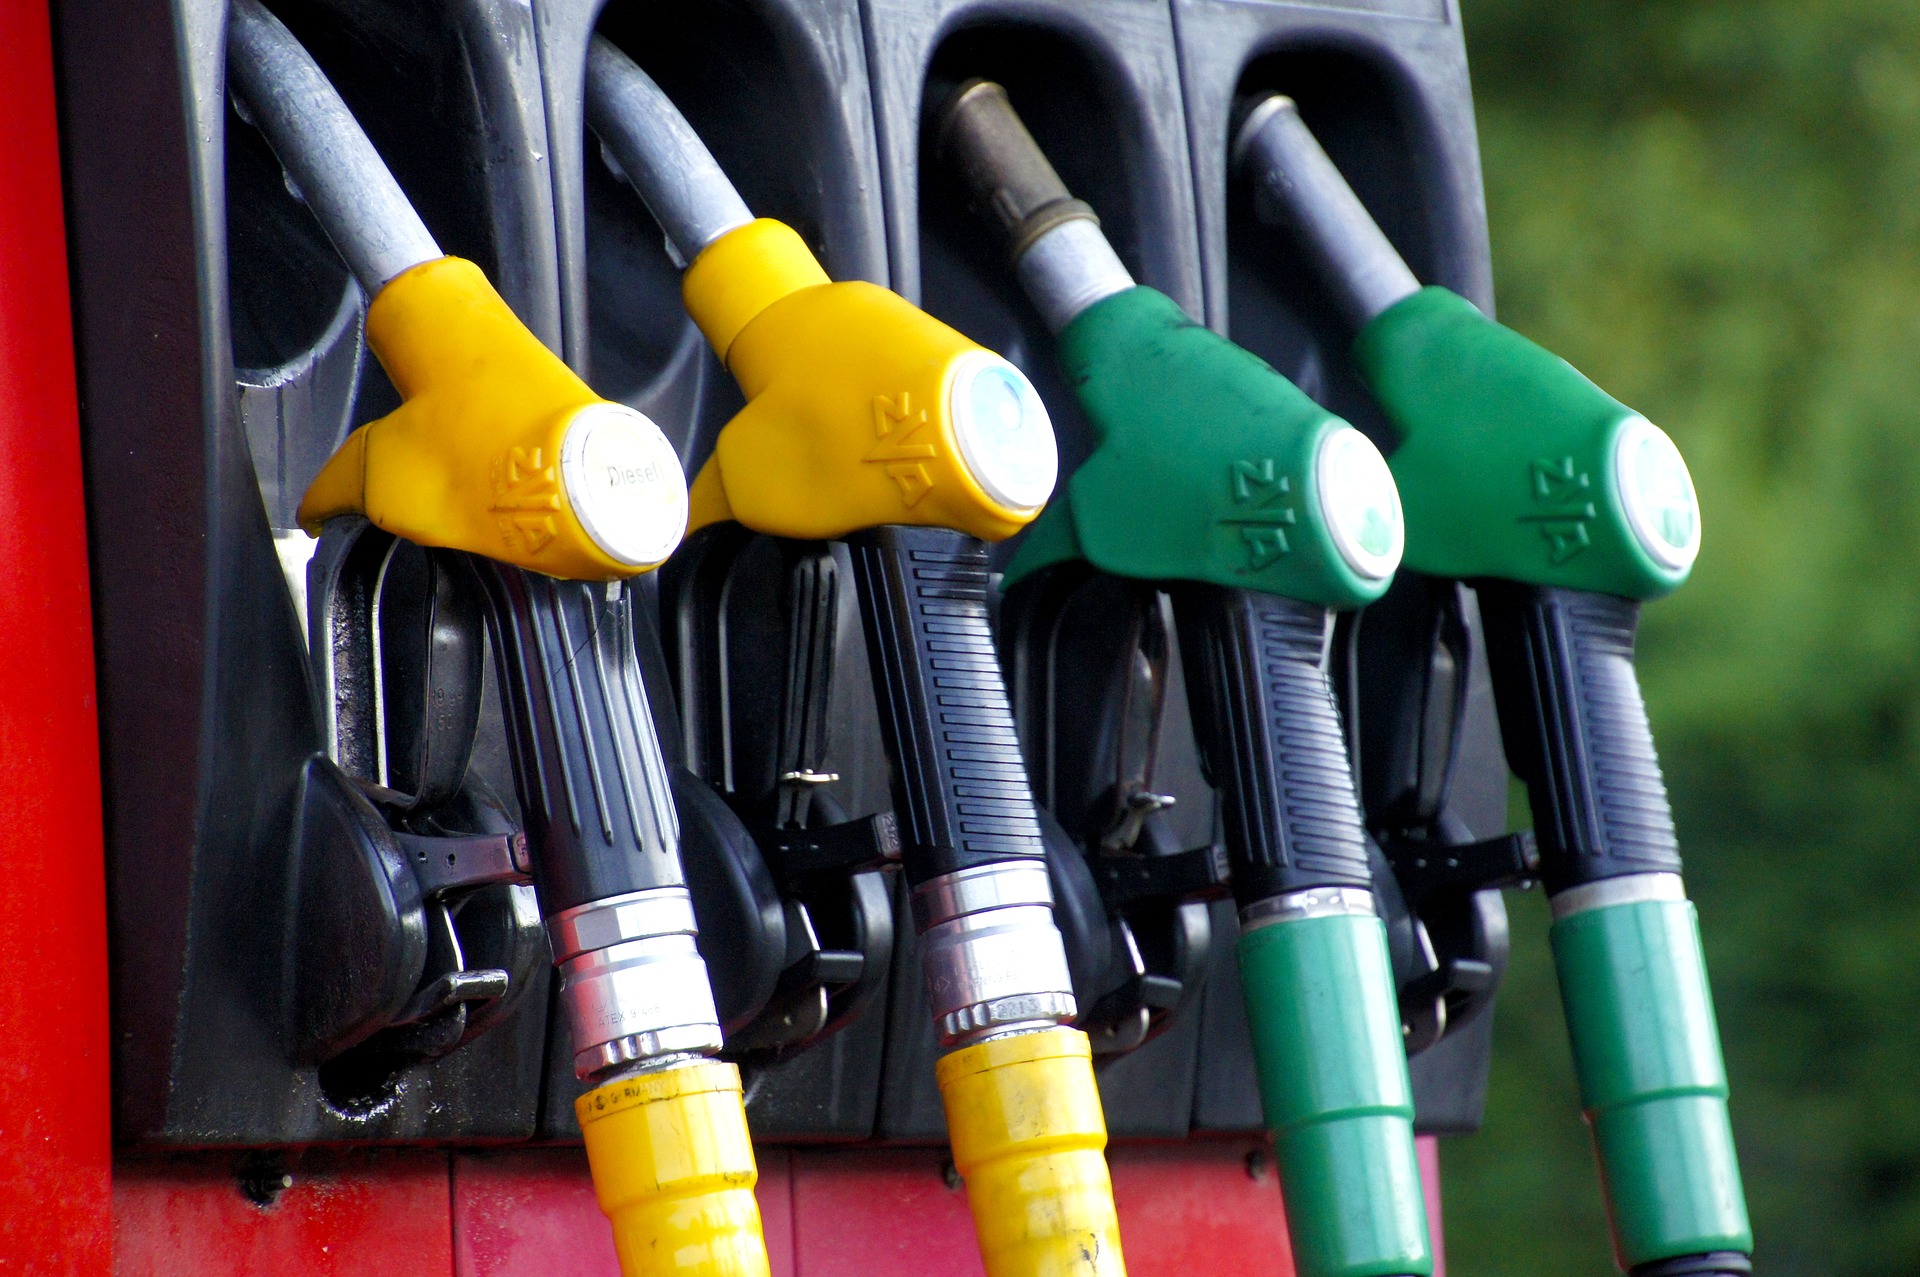 Fuel prices for month of August announced in Oman